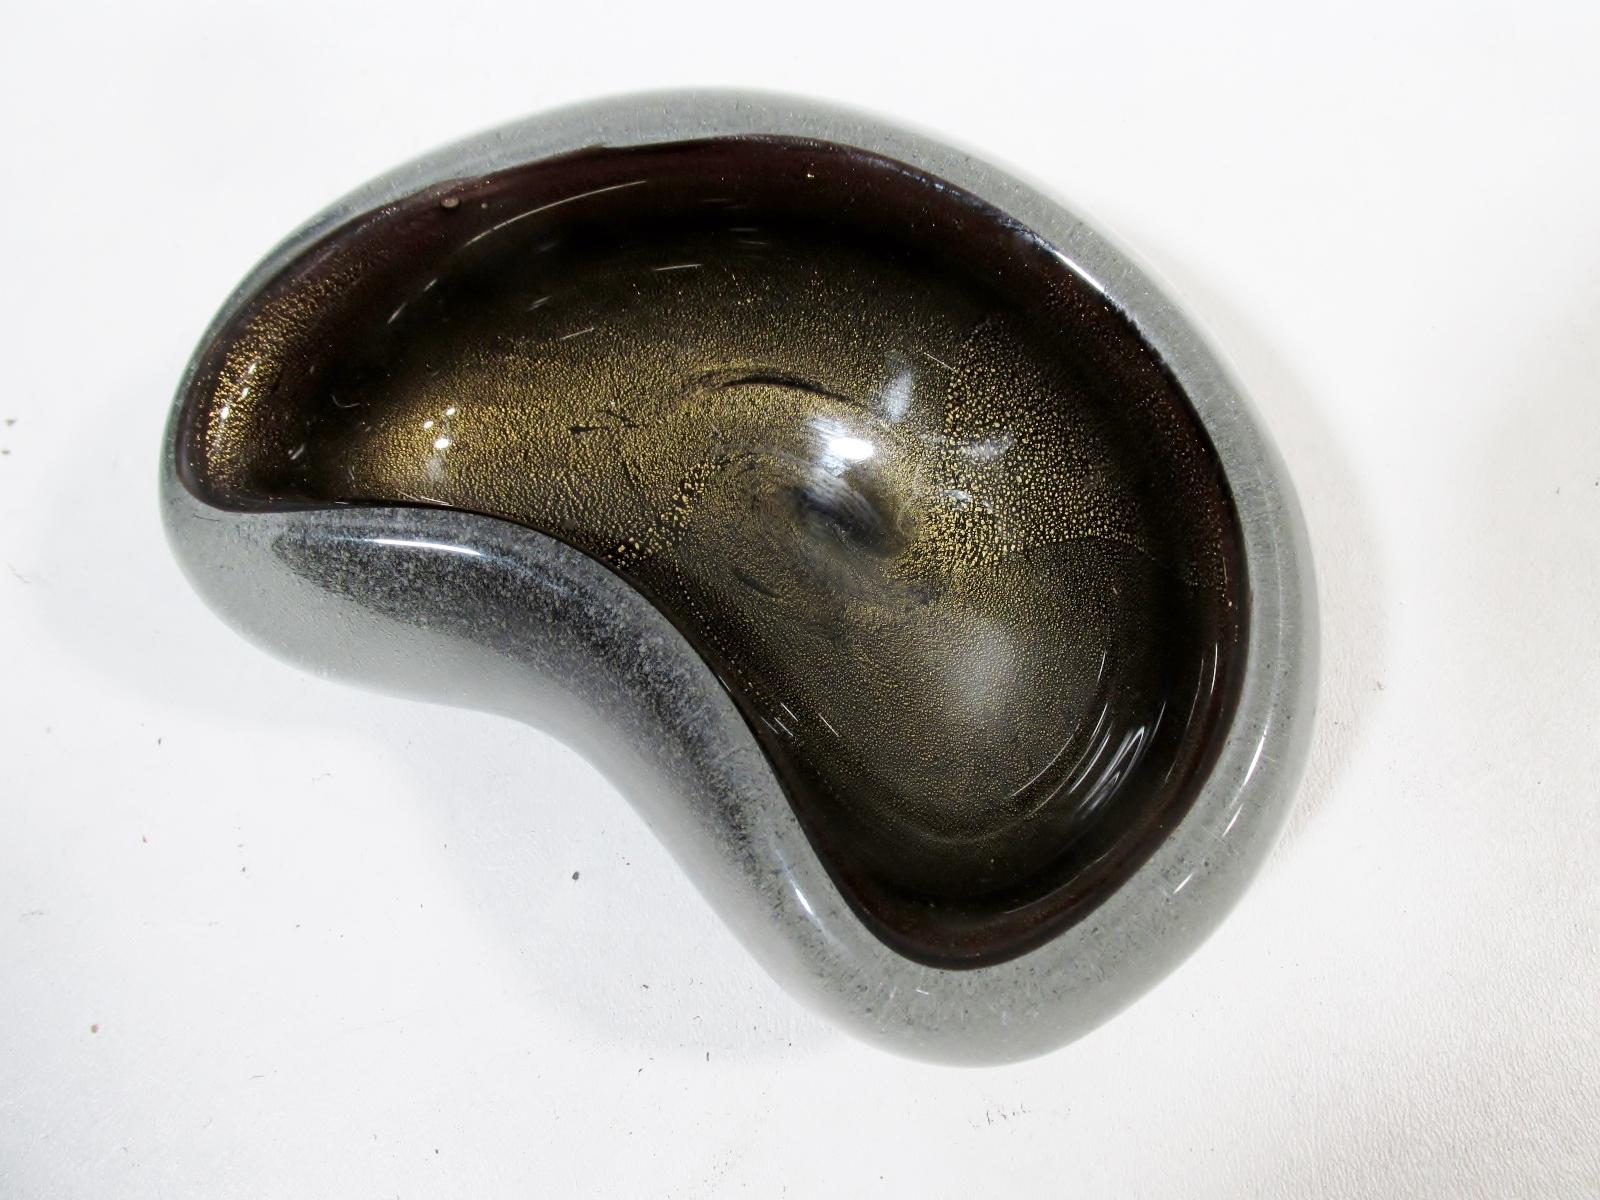 Beautiful and heavy Italian Murano glass kidney form bowl 6.5” x 5” and 2.5” deep, a small coin or dresser Vide-Poche. Outer layer Puleguso glass with gold foil decoration to a dark glass interior, appears to look like bronze. This has been